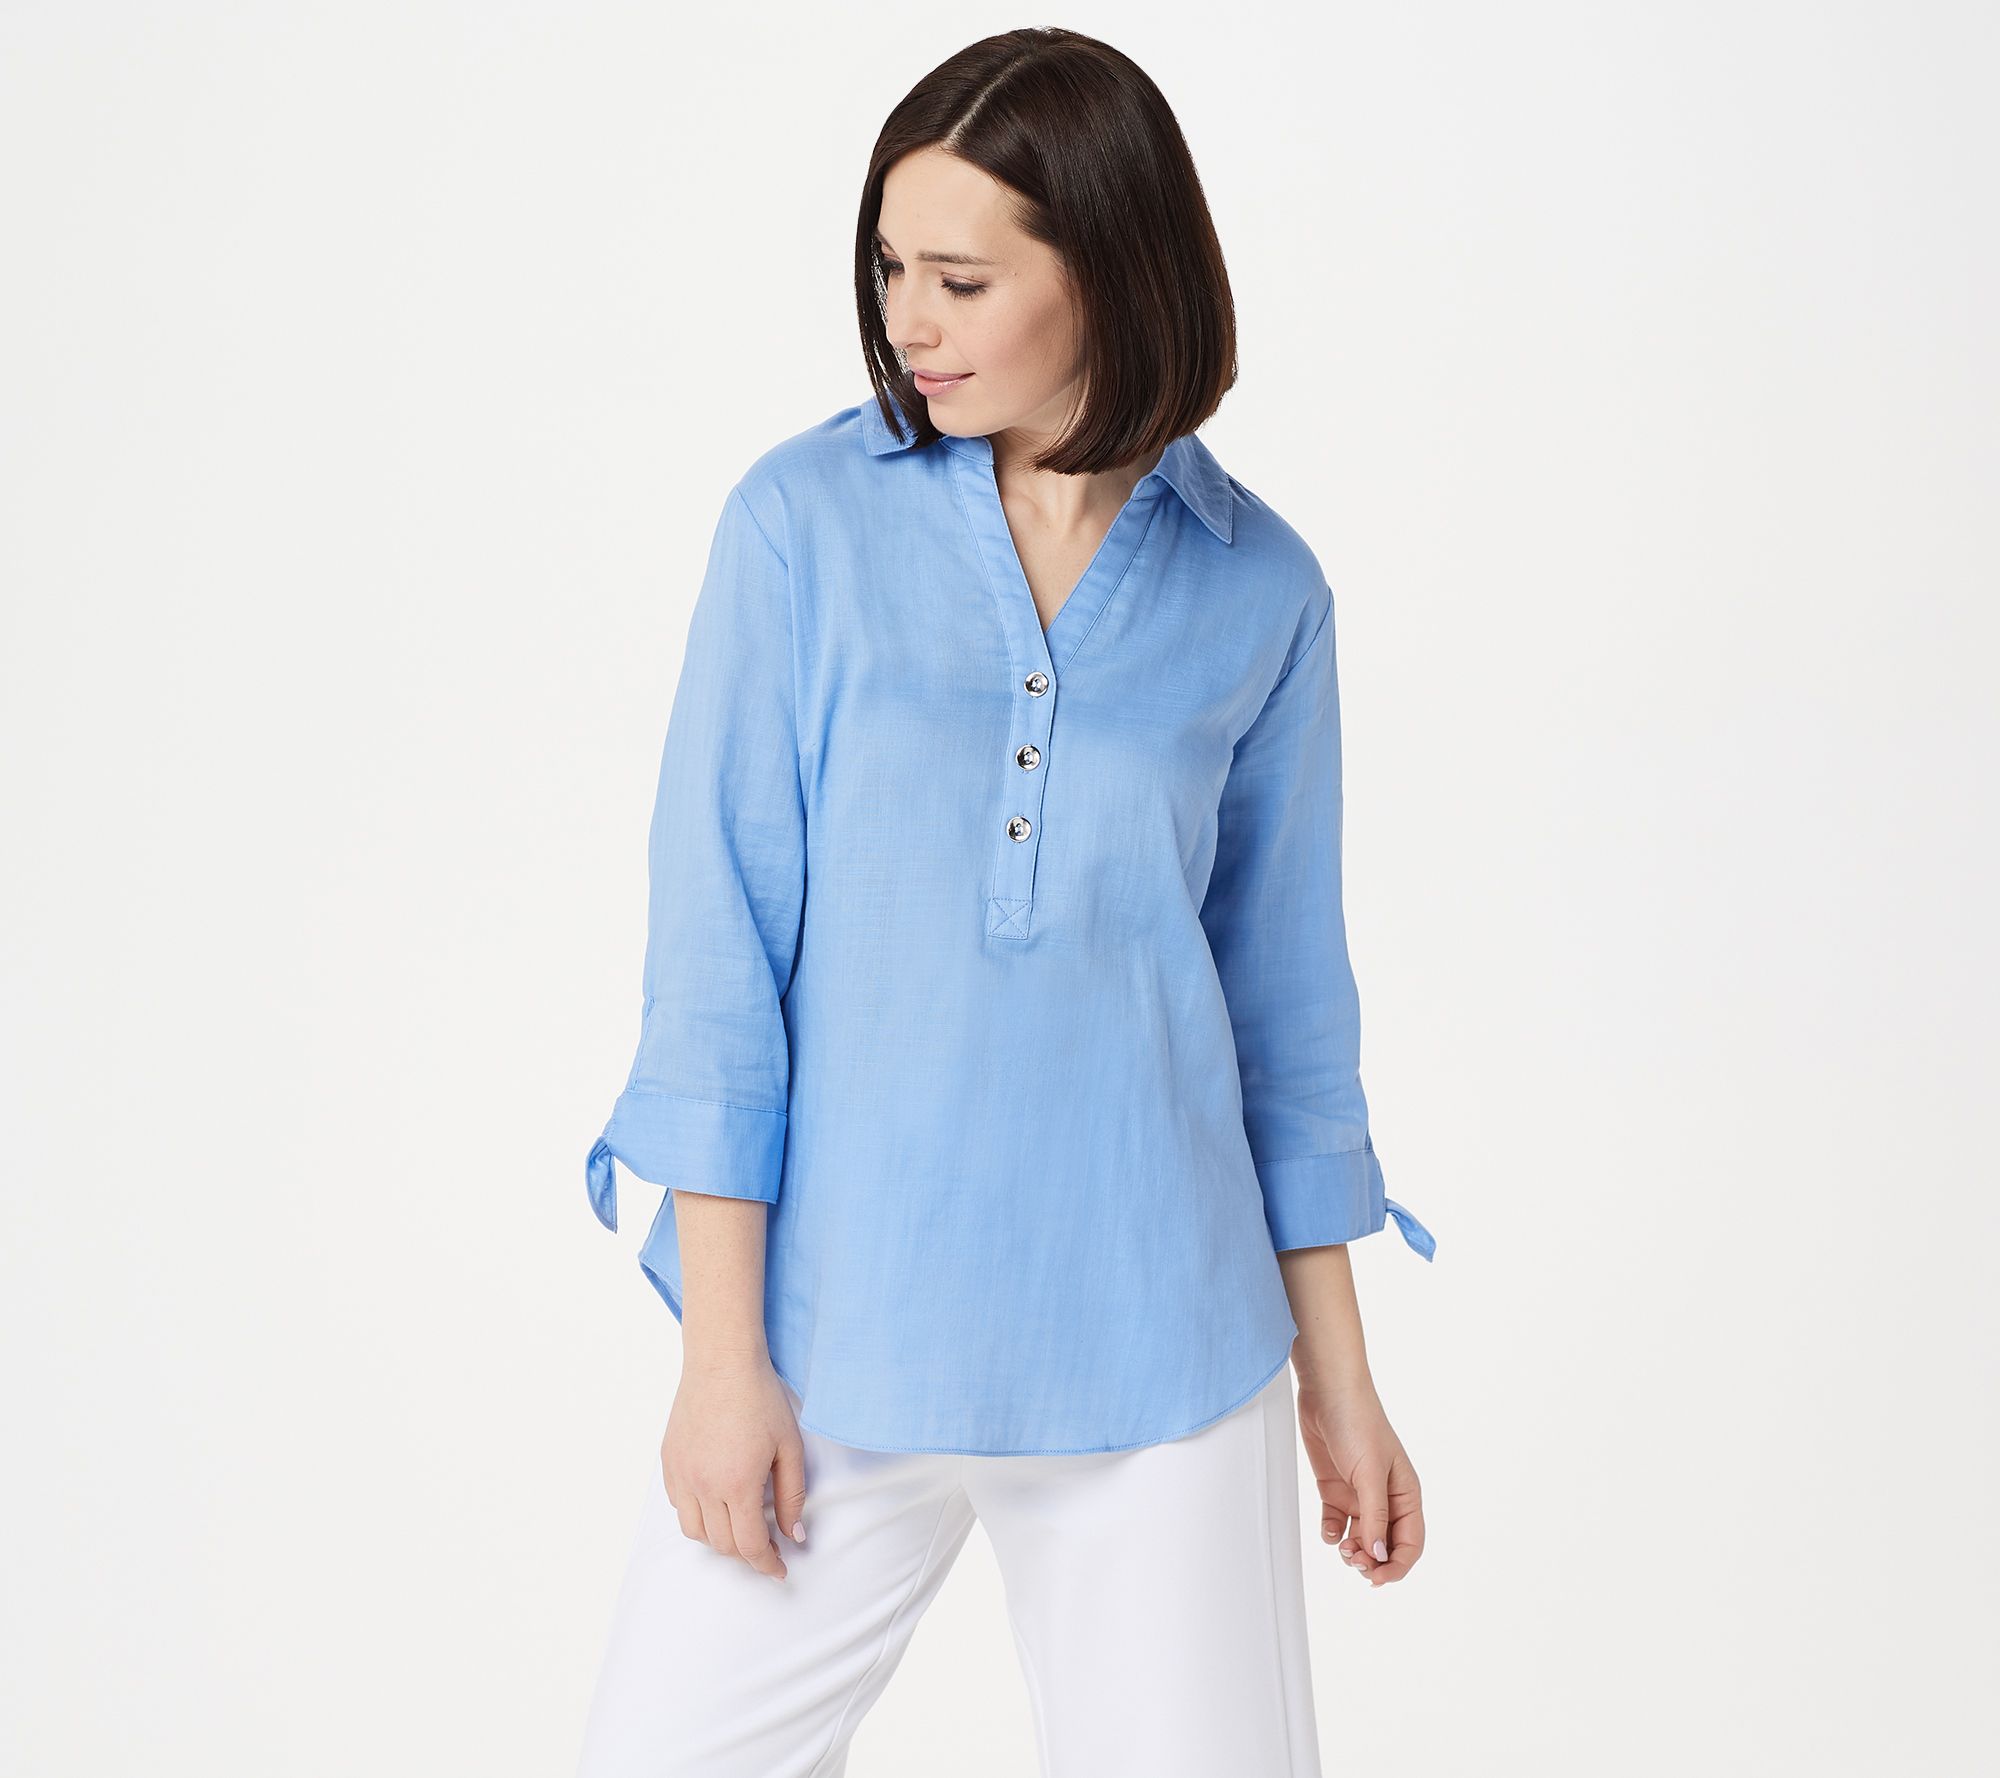 H by Halston Woven Button Front Shirt with Tie Sleeve Detail - QVC.com